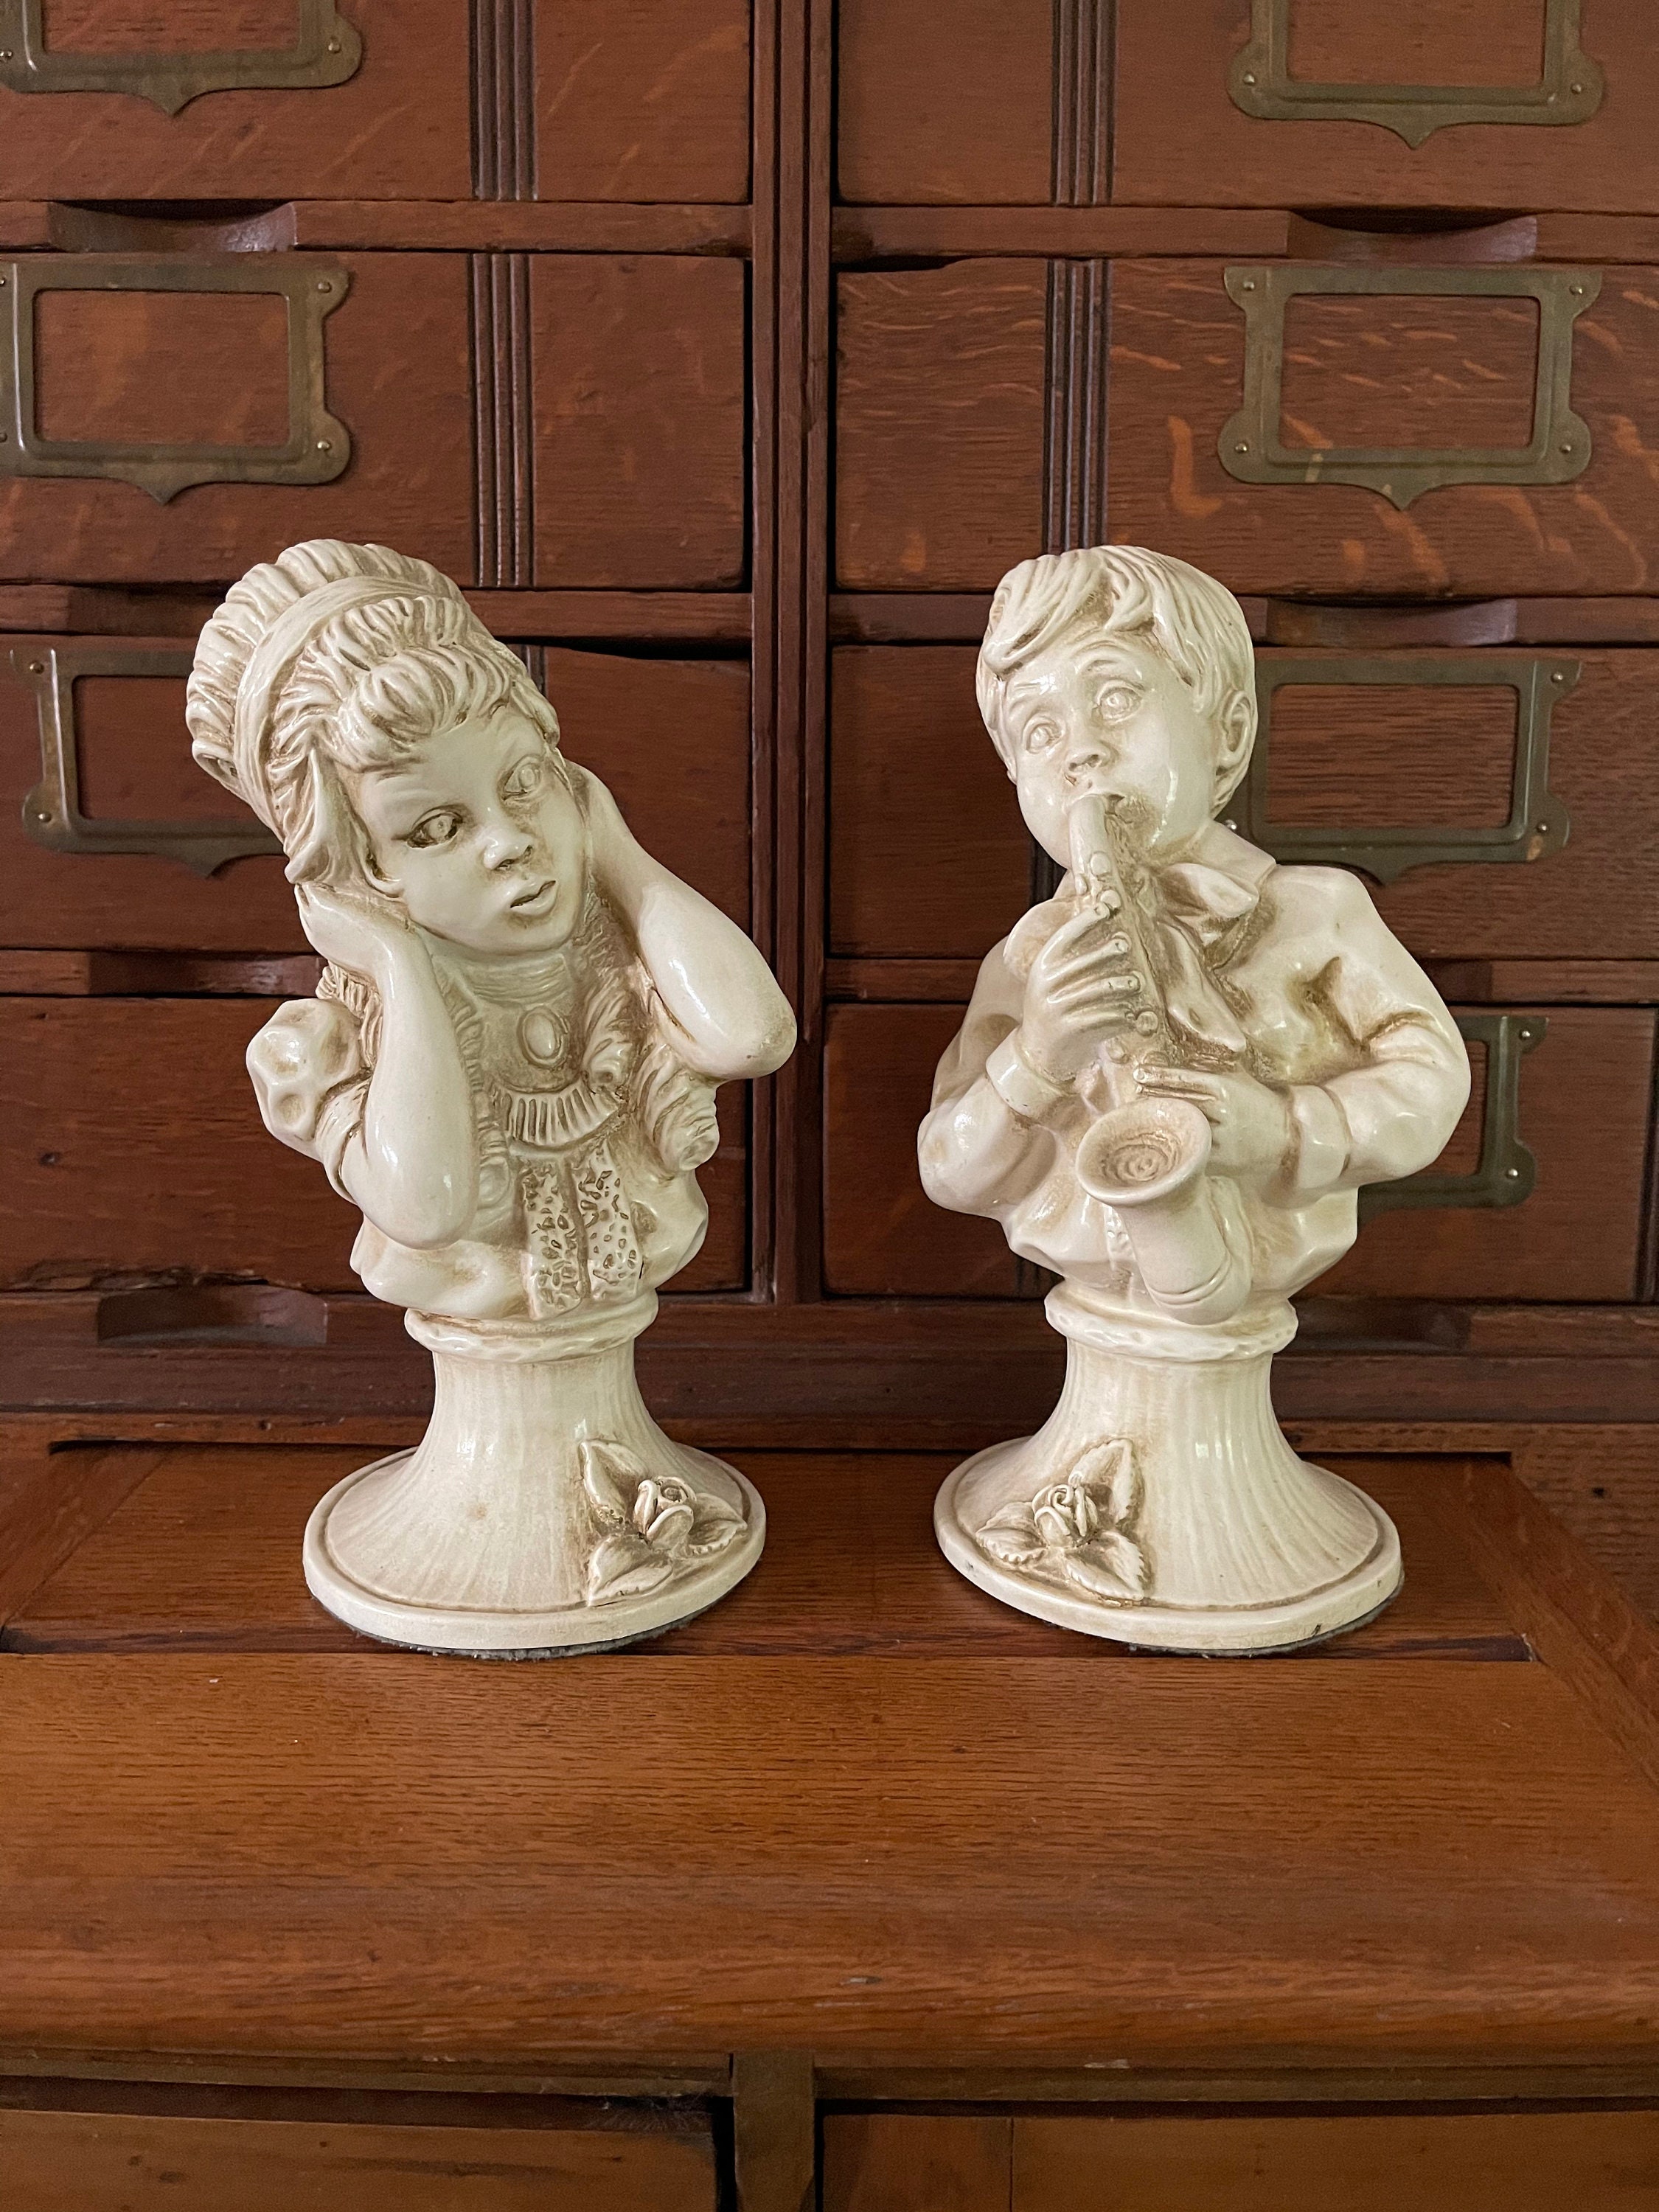 1950s Shabby Chic Brother and Sister Vintage Pair of White Boy and Girl Ceramic Pedestal Busts